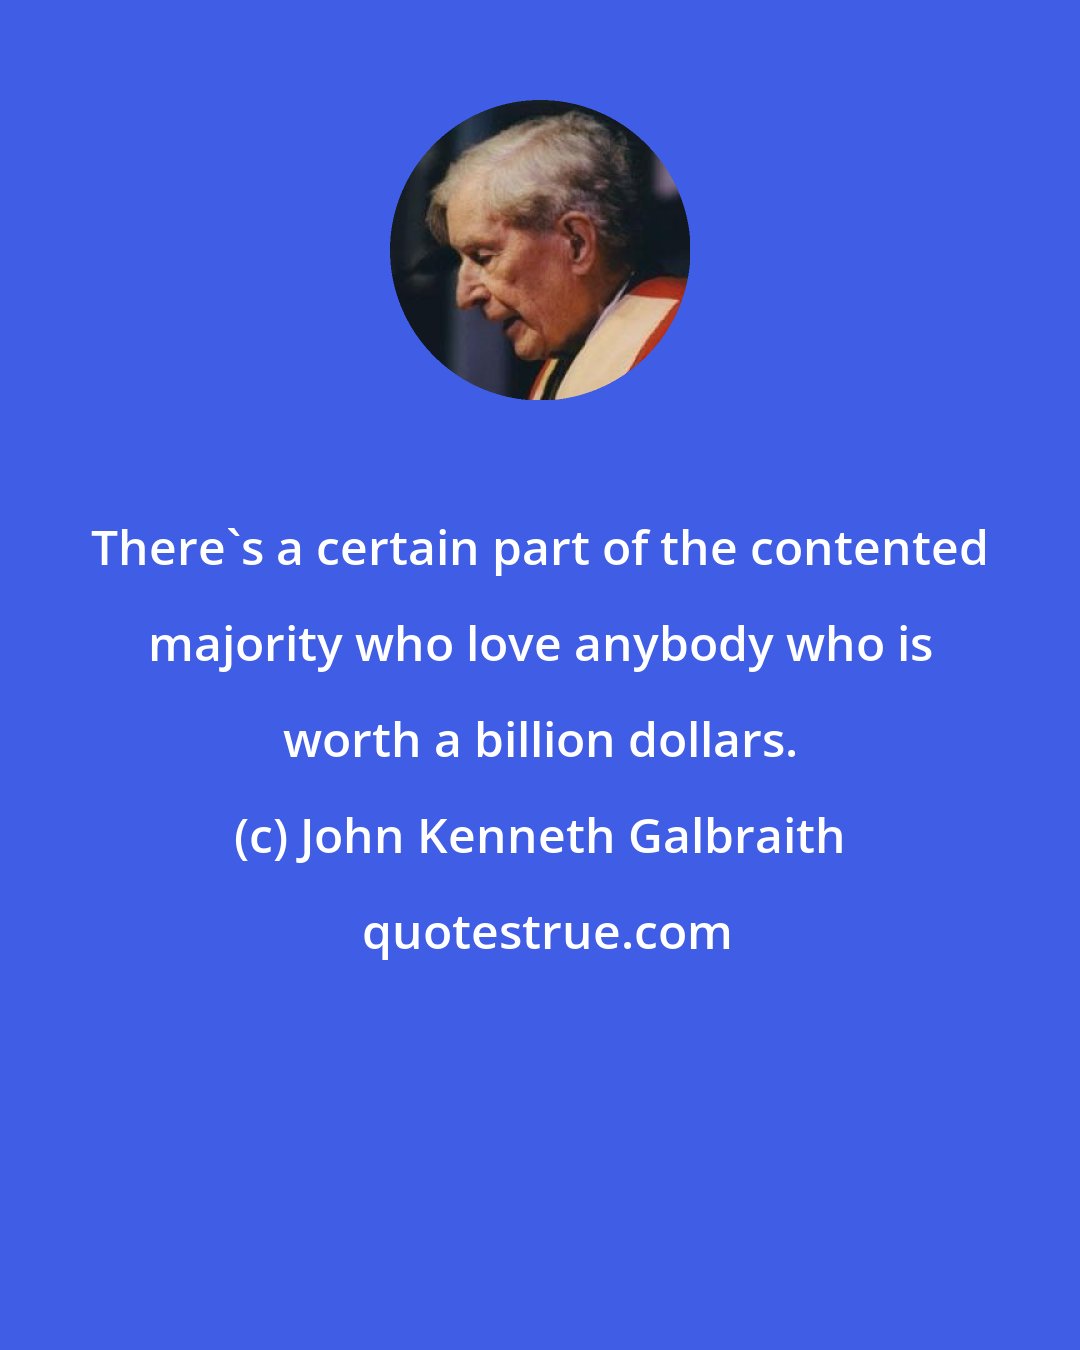 John Kenneth Galbraith: There's a certain part of the contented majority who love anybody who is worth a billion dollars.